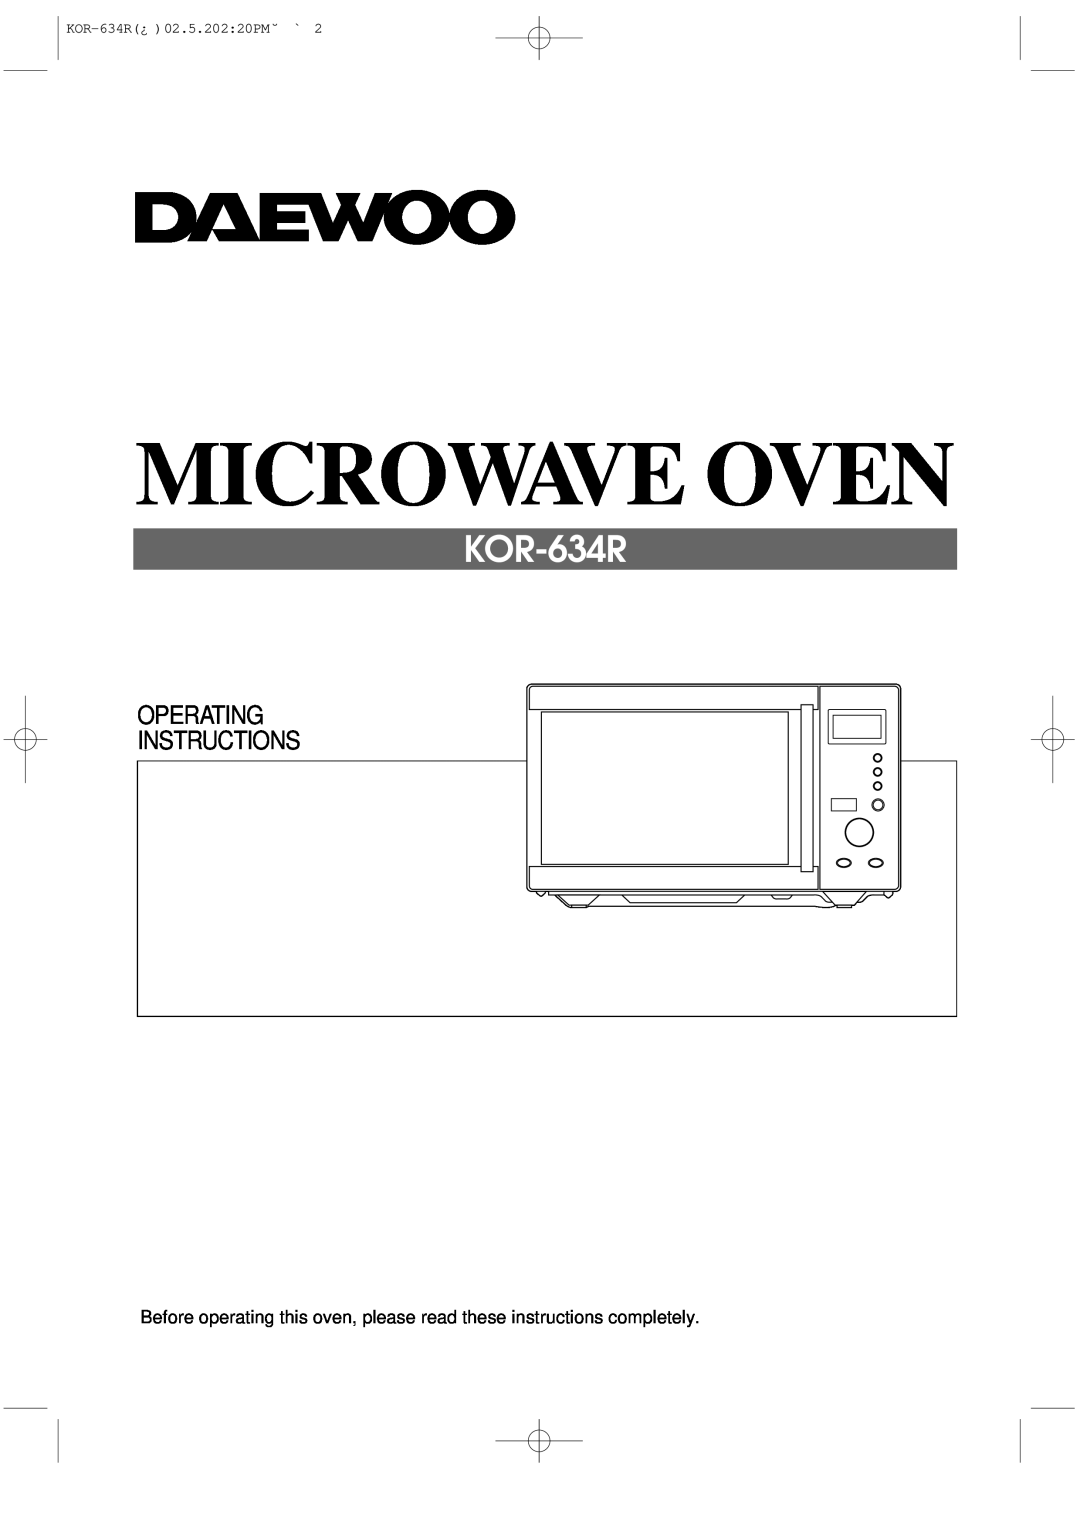 Daewoo operating instructions Microwave Oven, Operating, Instructions, KOR-634R¿02.5.202 20PM˘ ` 